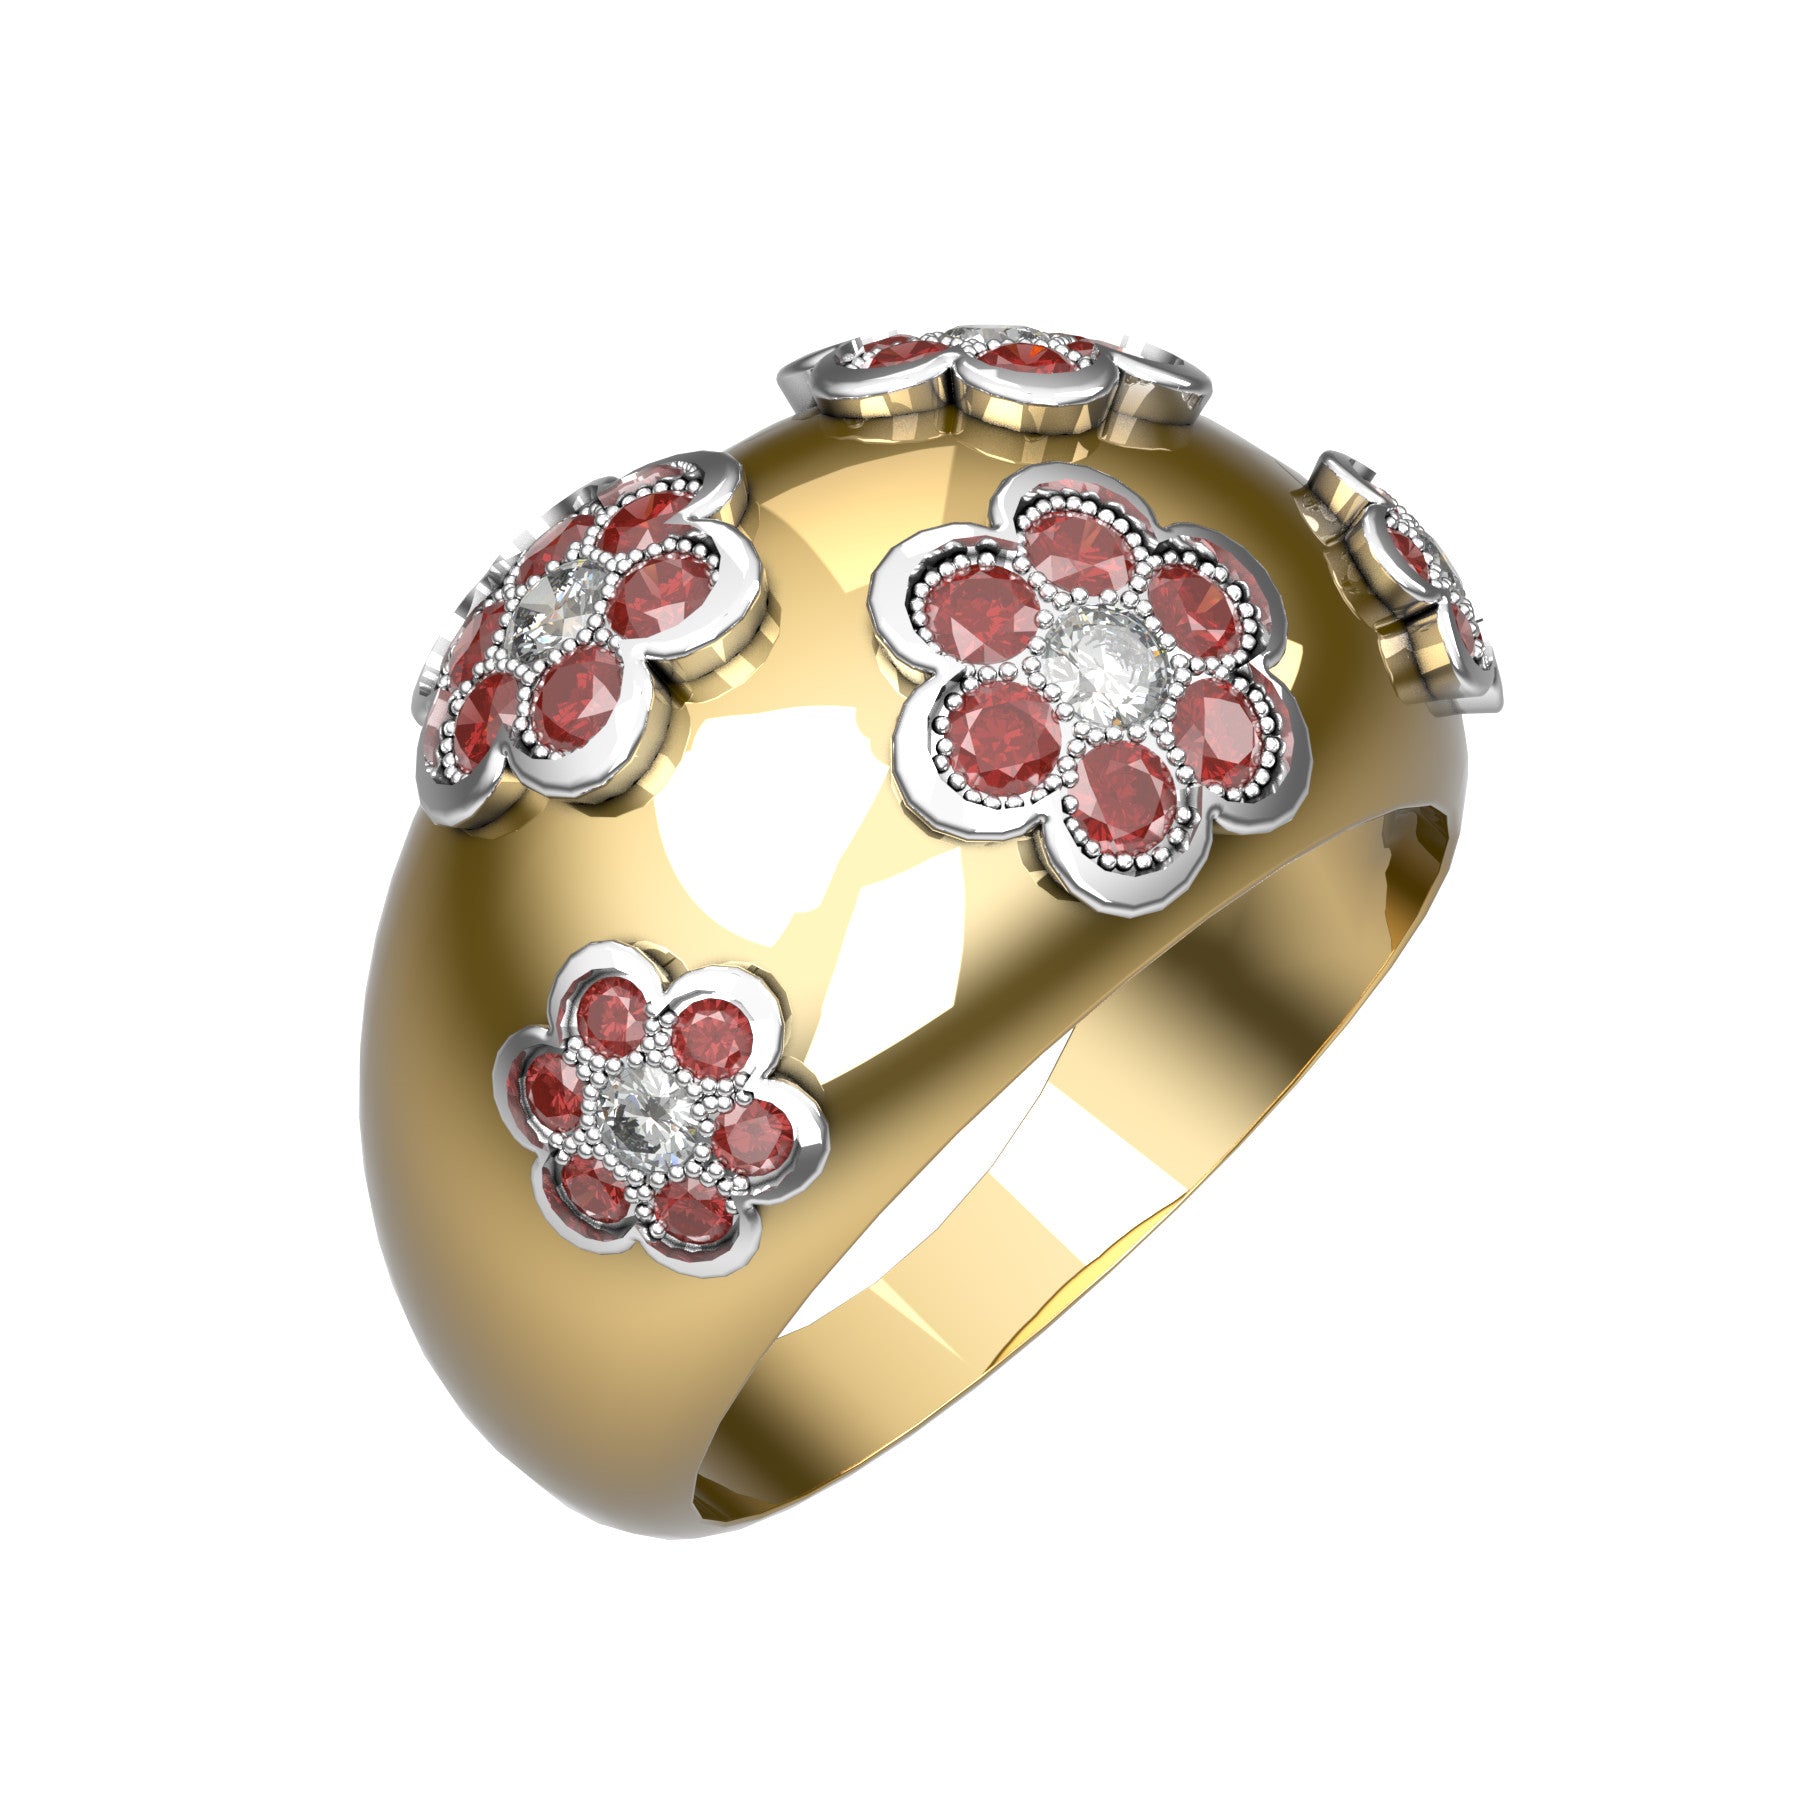 Blooming band ring, natural round diamonds, natural round rubies, 18 k yellow and white gold, weight about 7,00 g (0.25 oz), width 12 mm max